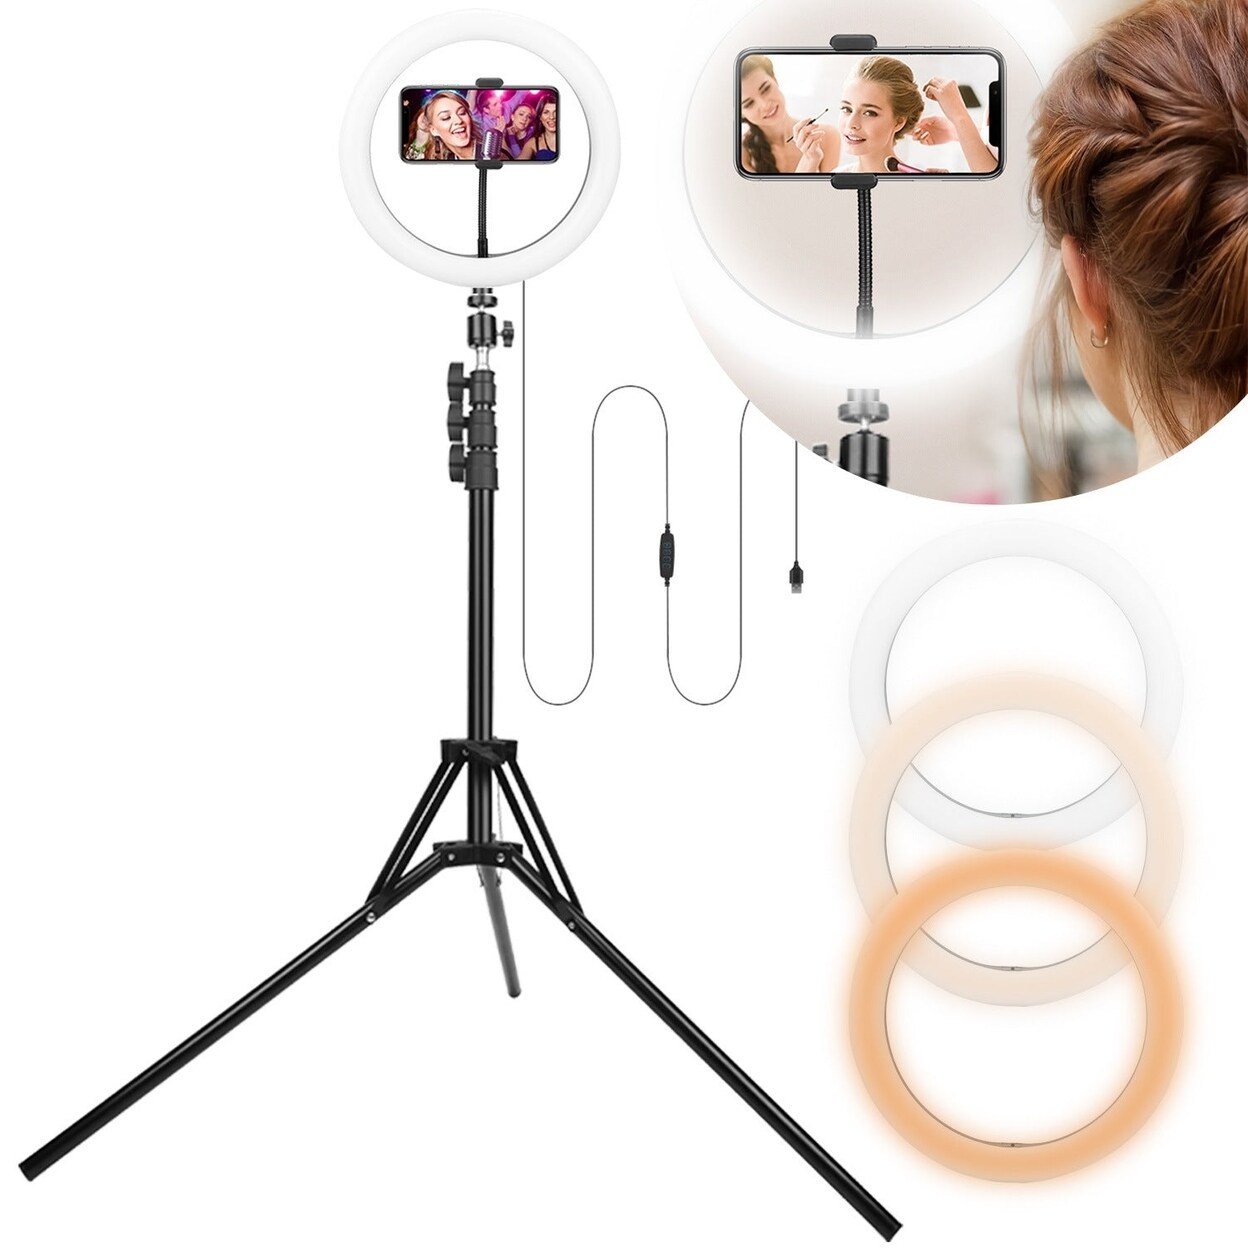 SKUSHOPS 10in LED Selfie Ring Light Dimmable 120 LEDs Makeup Ring Lights with Adjustable Tripod Stand Cell Phone Holder USB